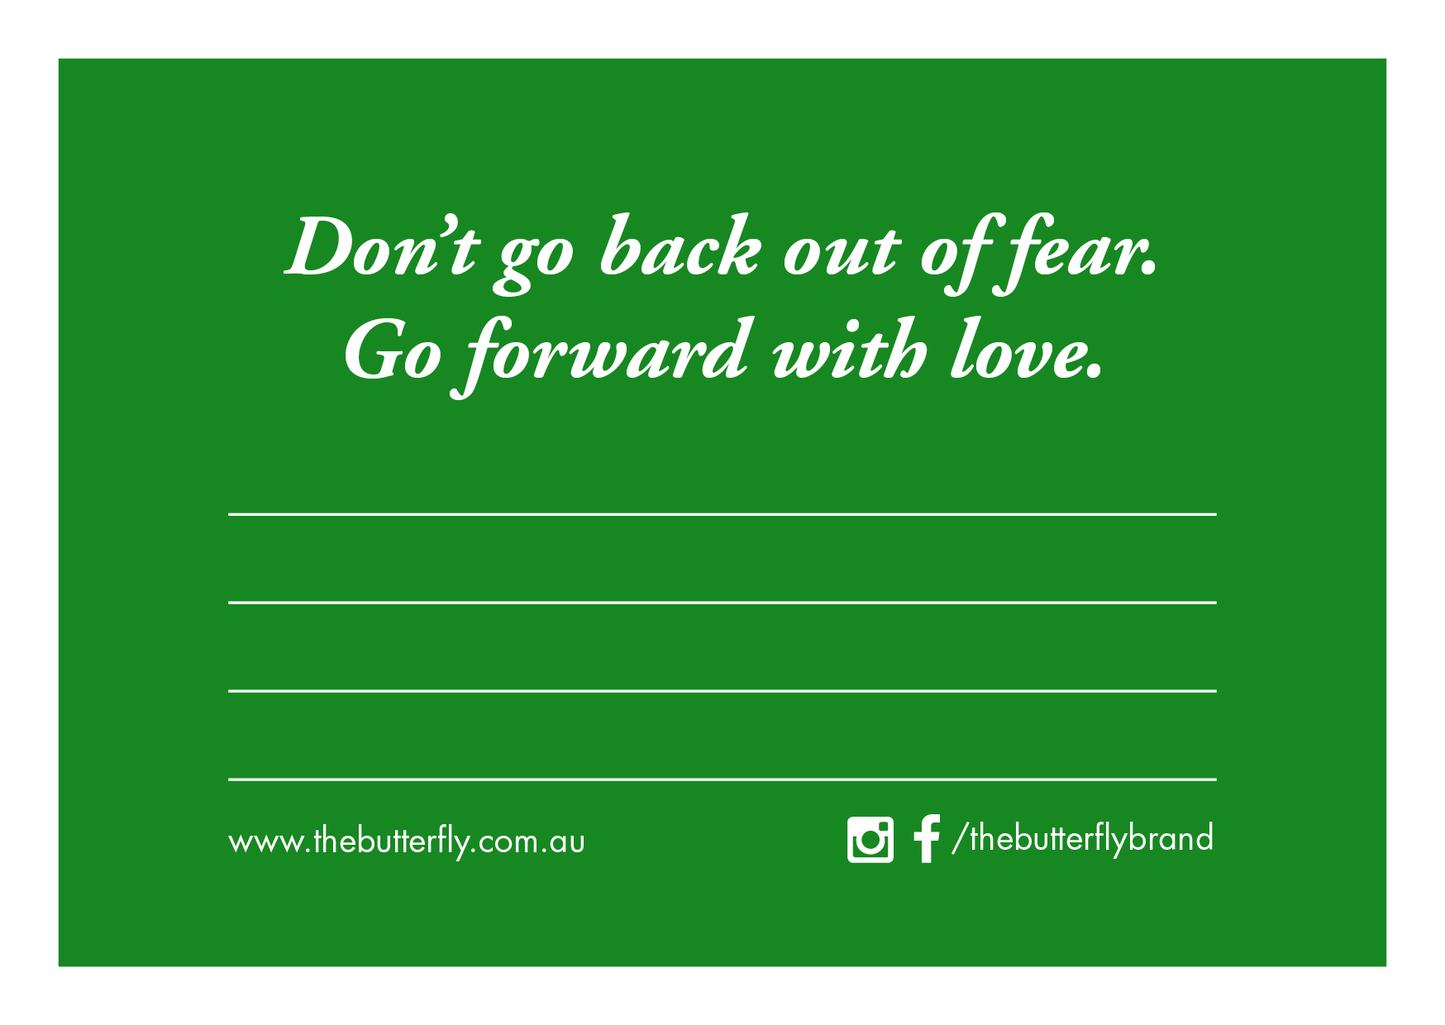 Green card, with lines for a message and a quote across the top: "Don't go back out of fear. Go forward with love."